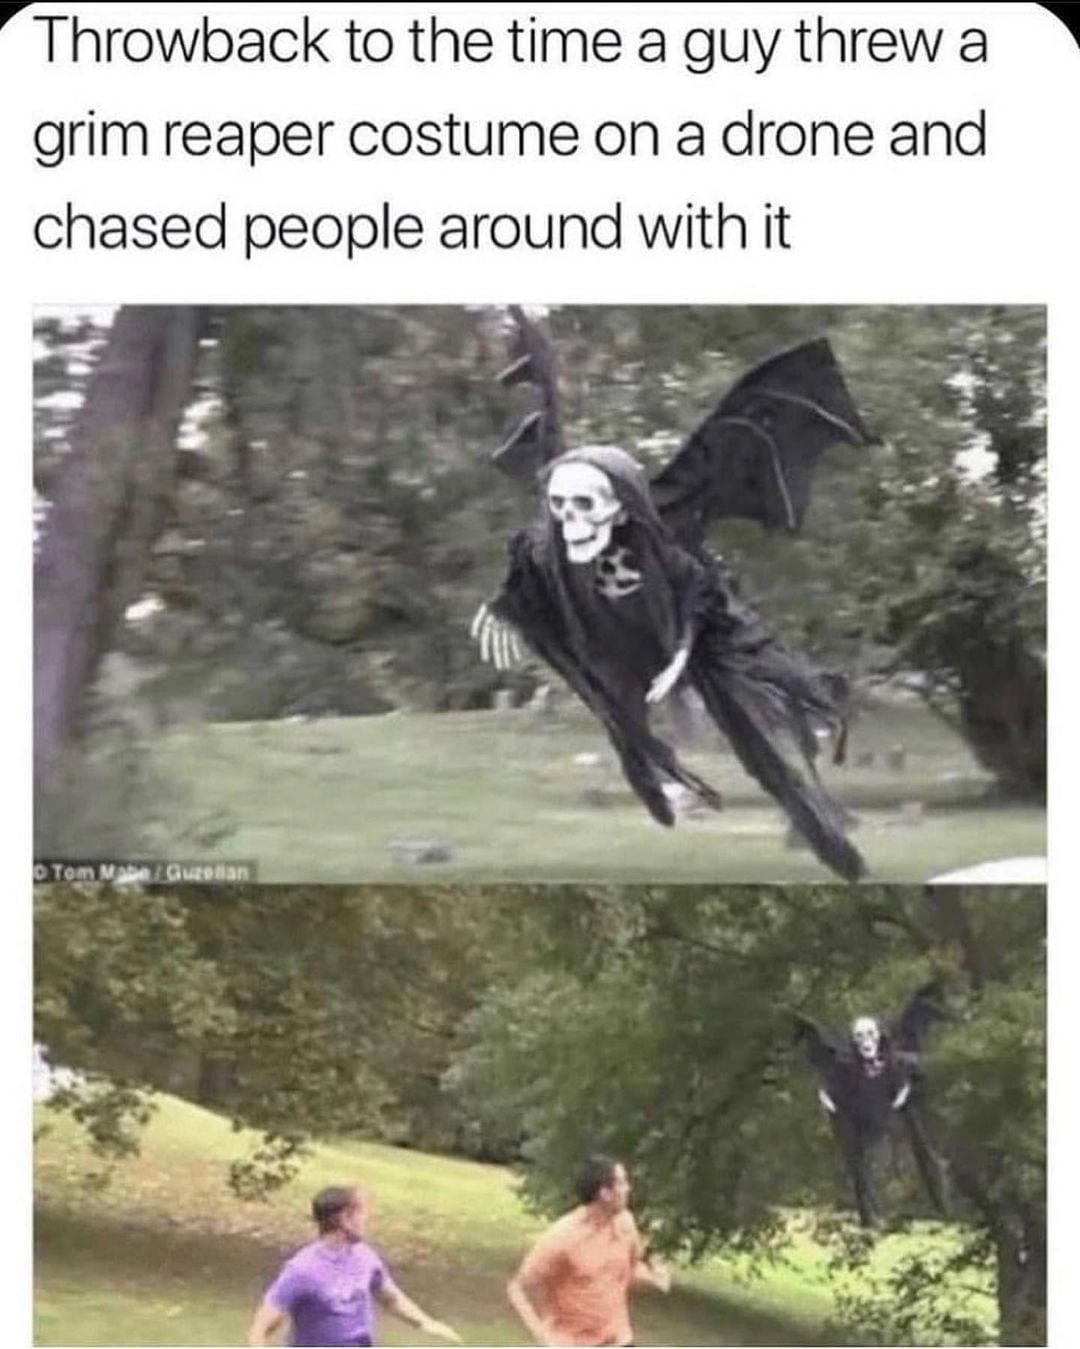 Throwback to the time a guy threw a grim reaper costume on a drone and chased people around with it.